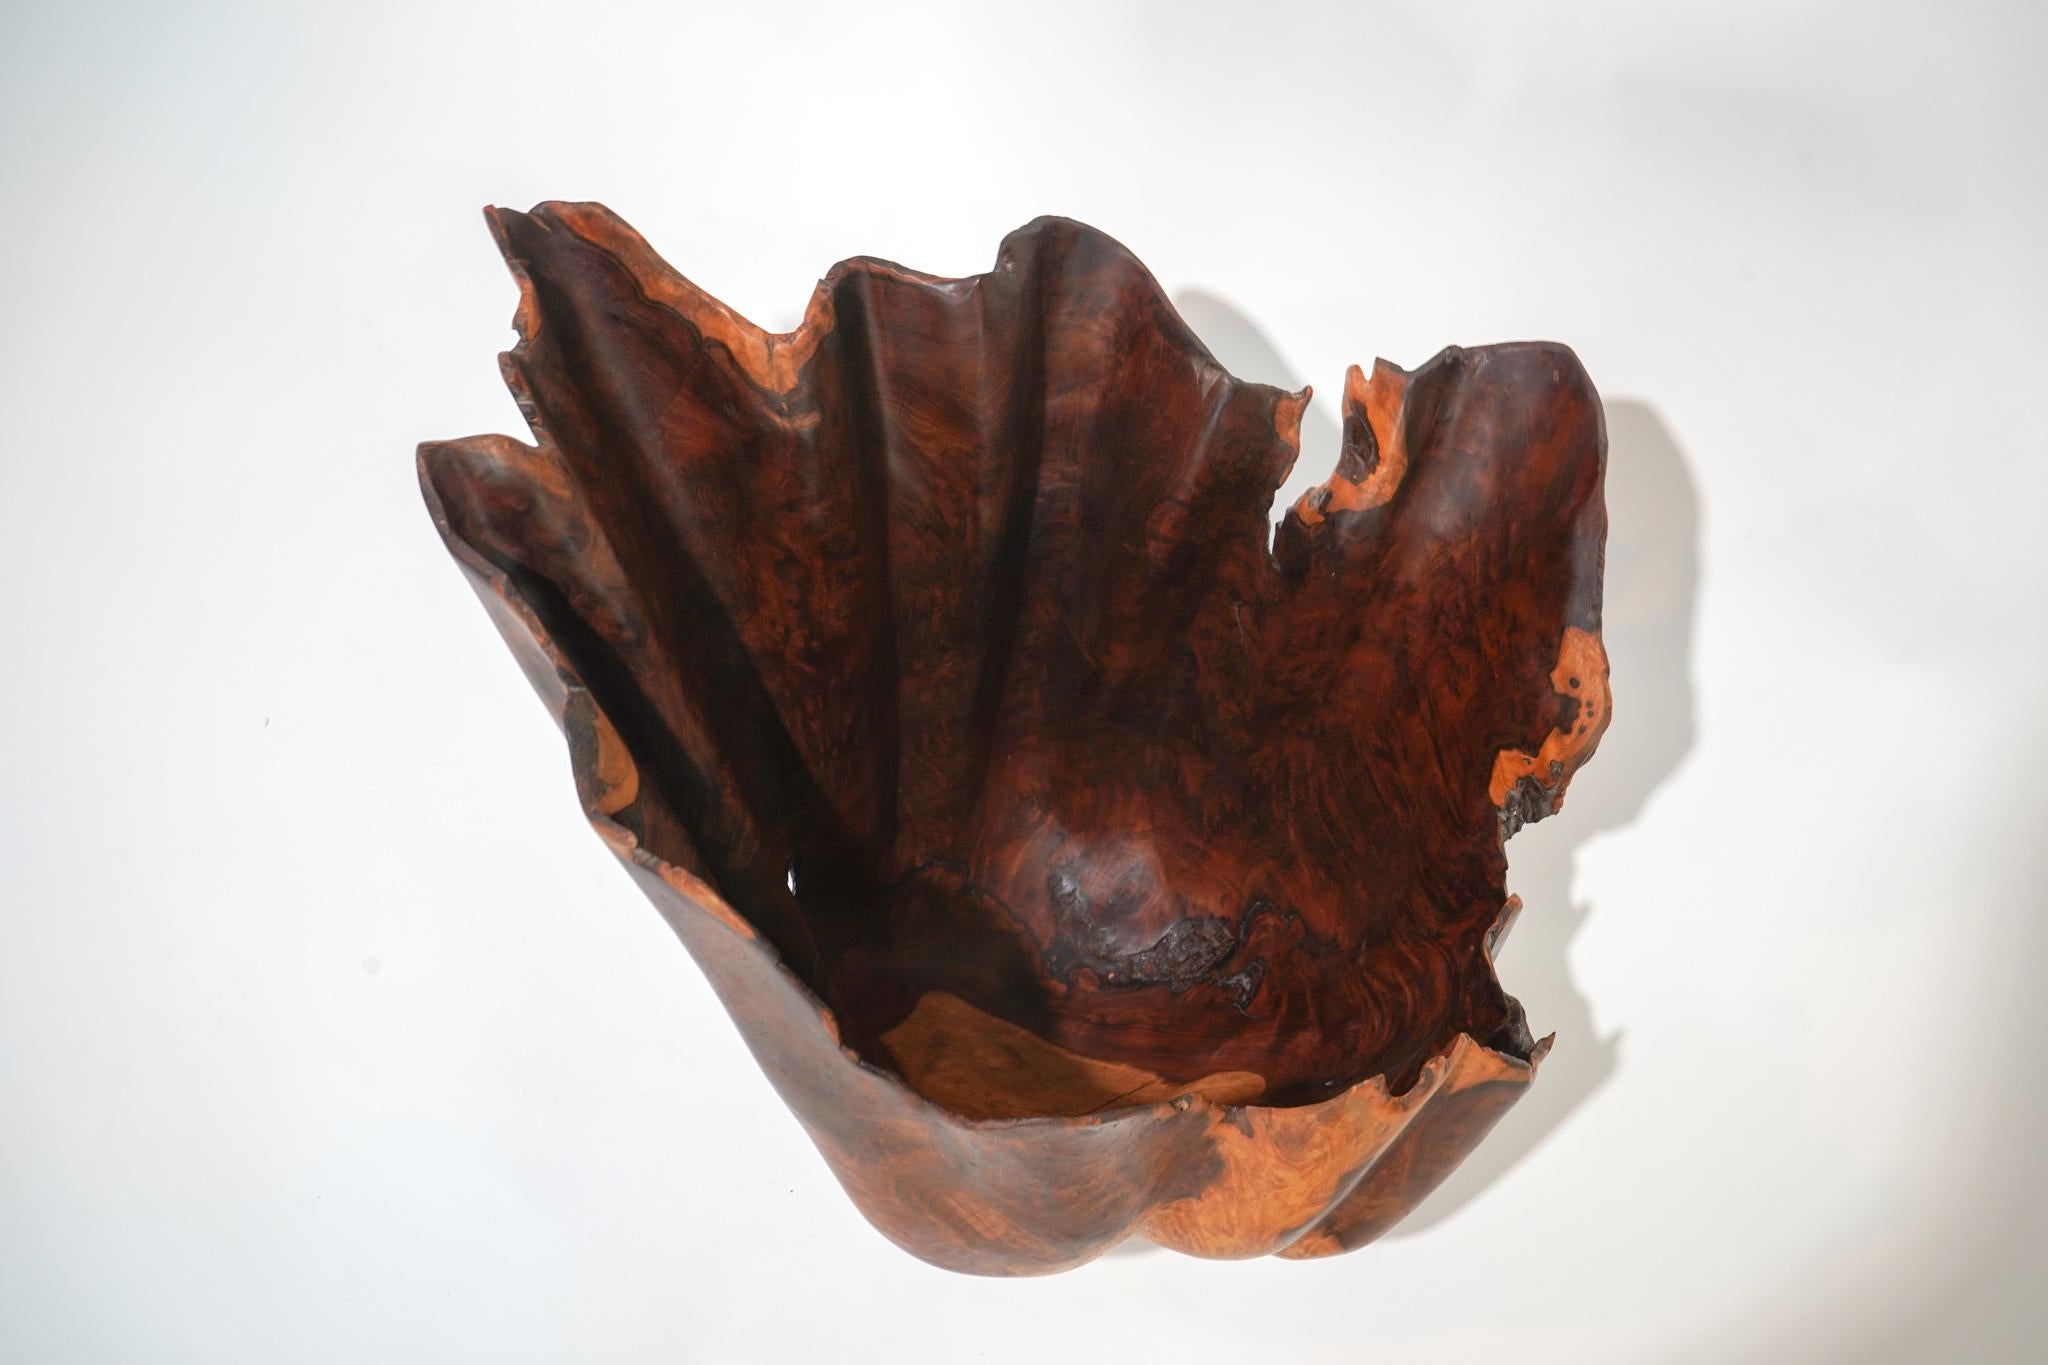 Carved redwood vessel sculpture by renowned artist Brad Sells. Sell's work can be found in private collections, museums and other public institutions. Sells also starred in the PBS series 